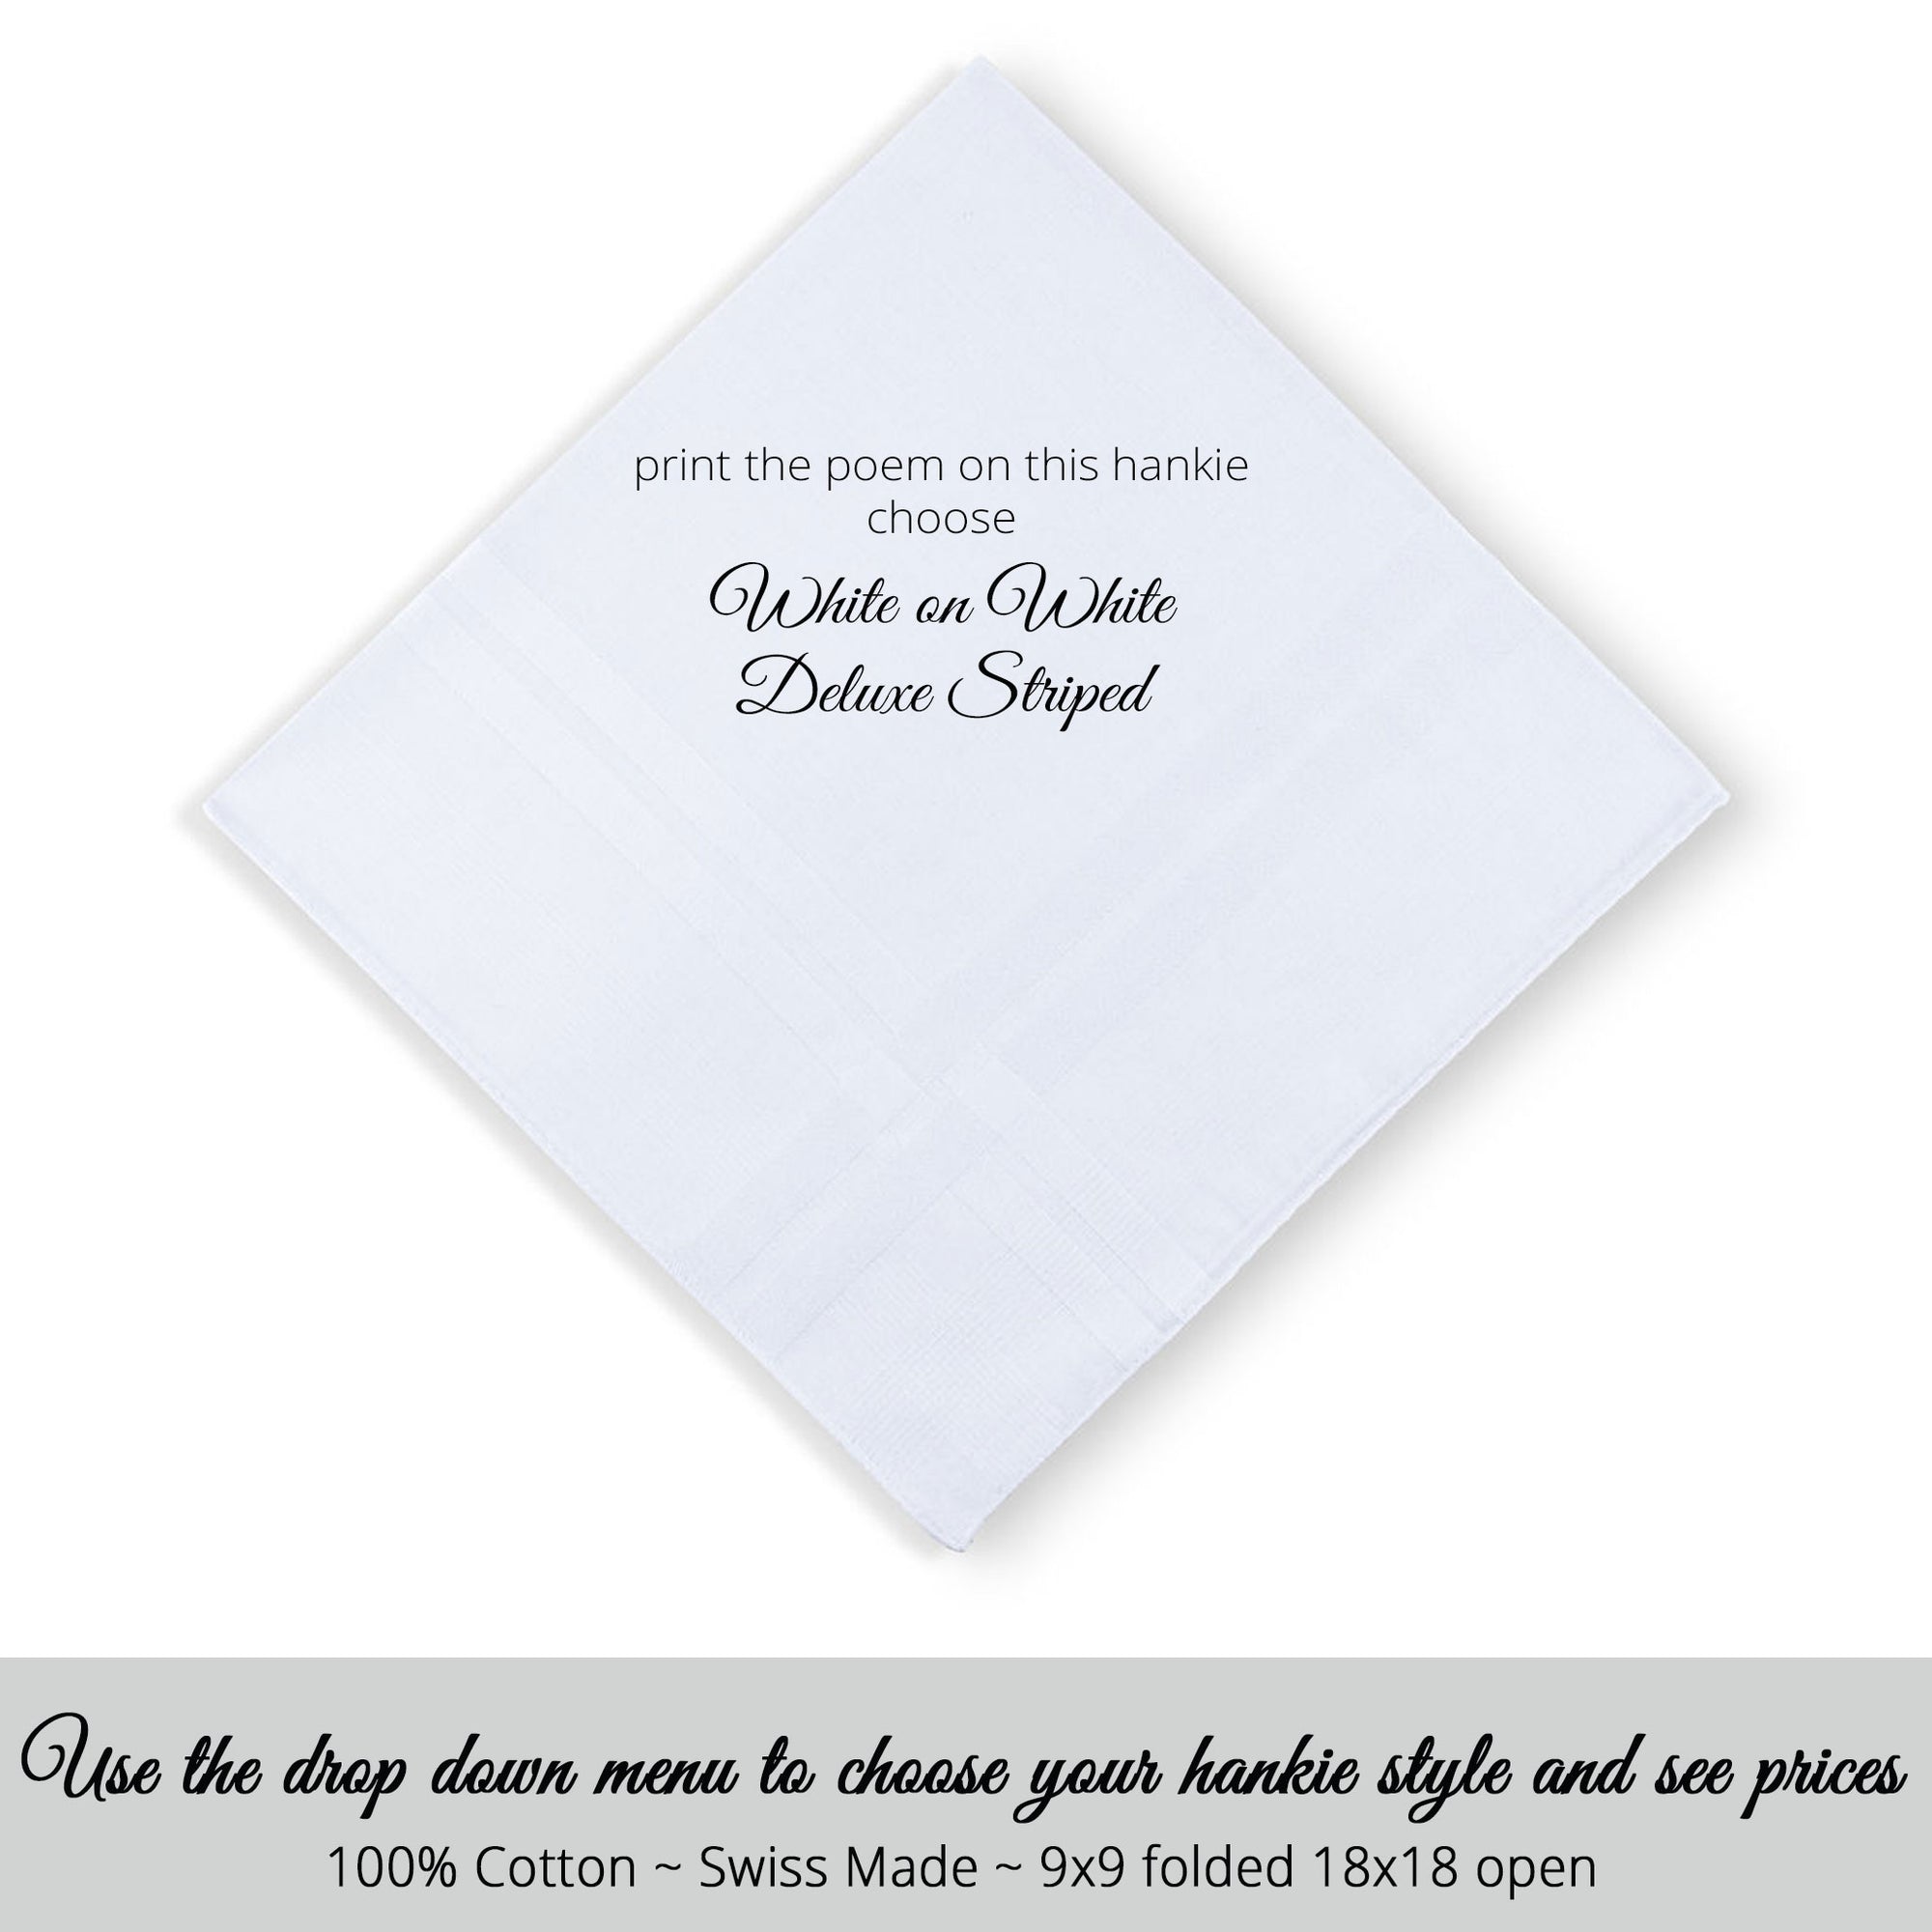 Gay Wedding Masculine Hankie style Swiss made white on white deluxe striped for a Loved One poem printed hankie